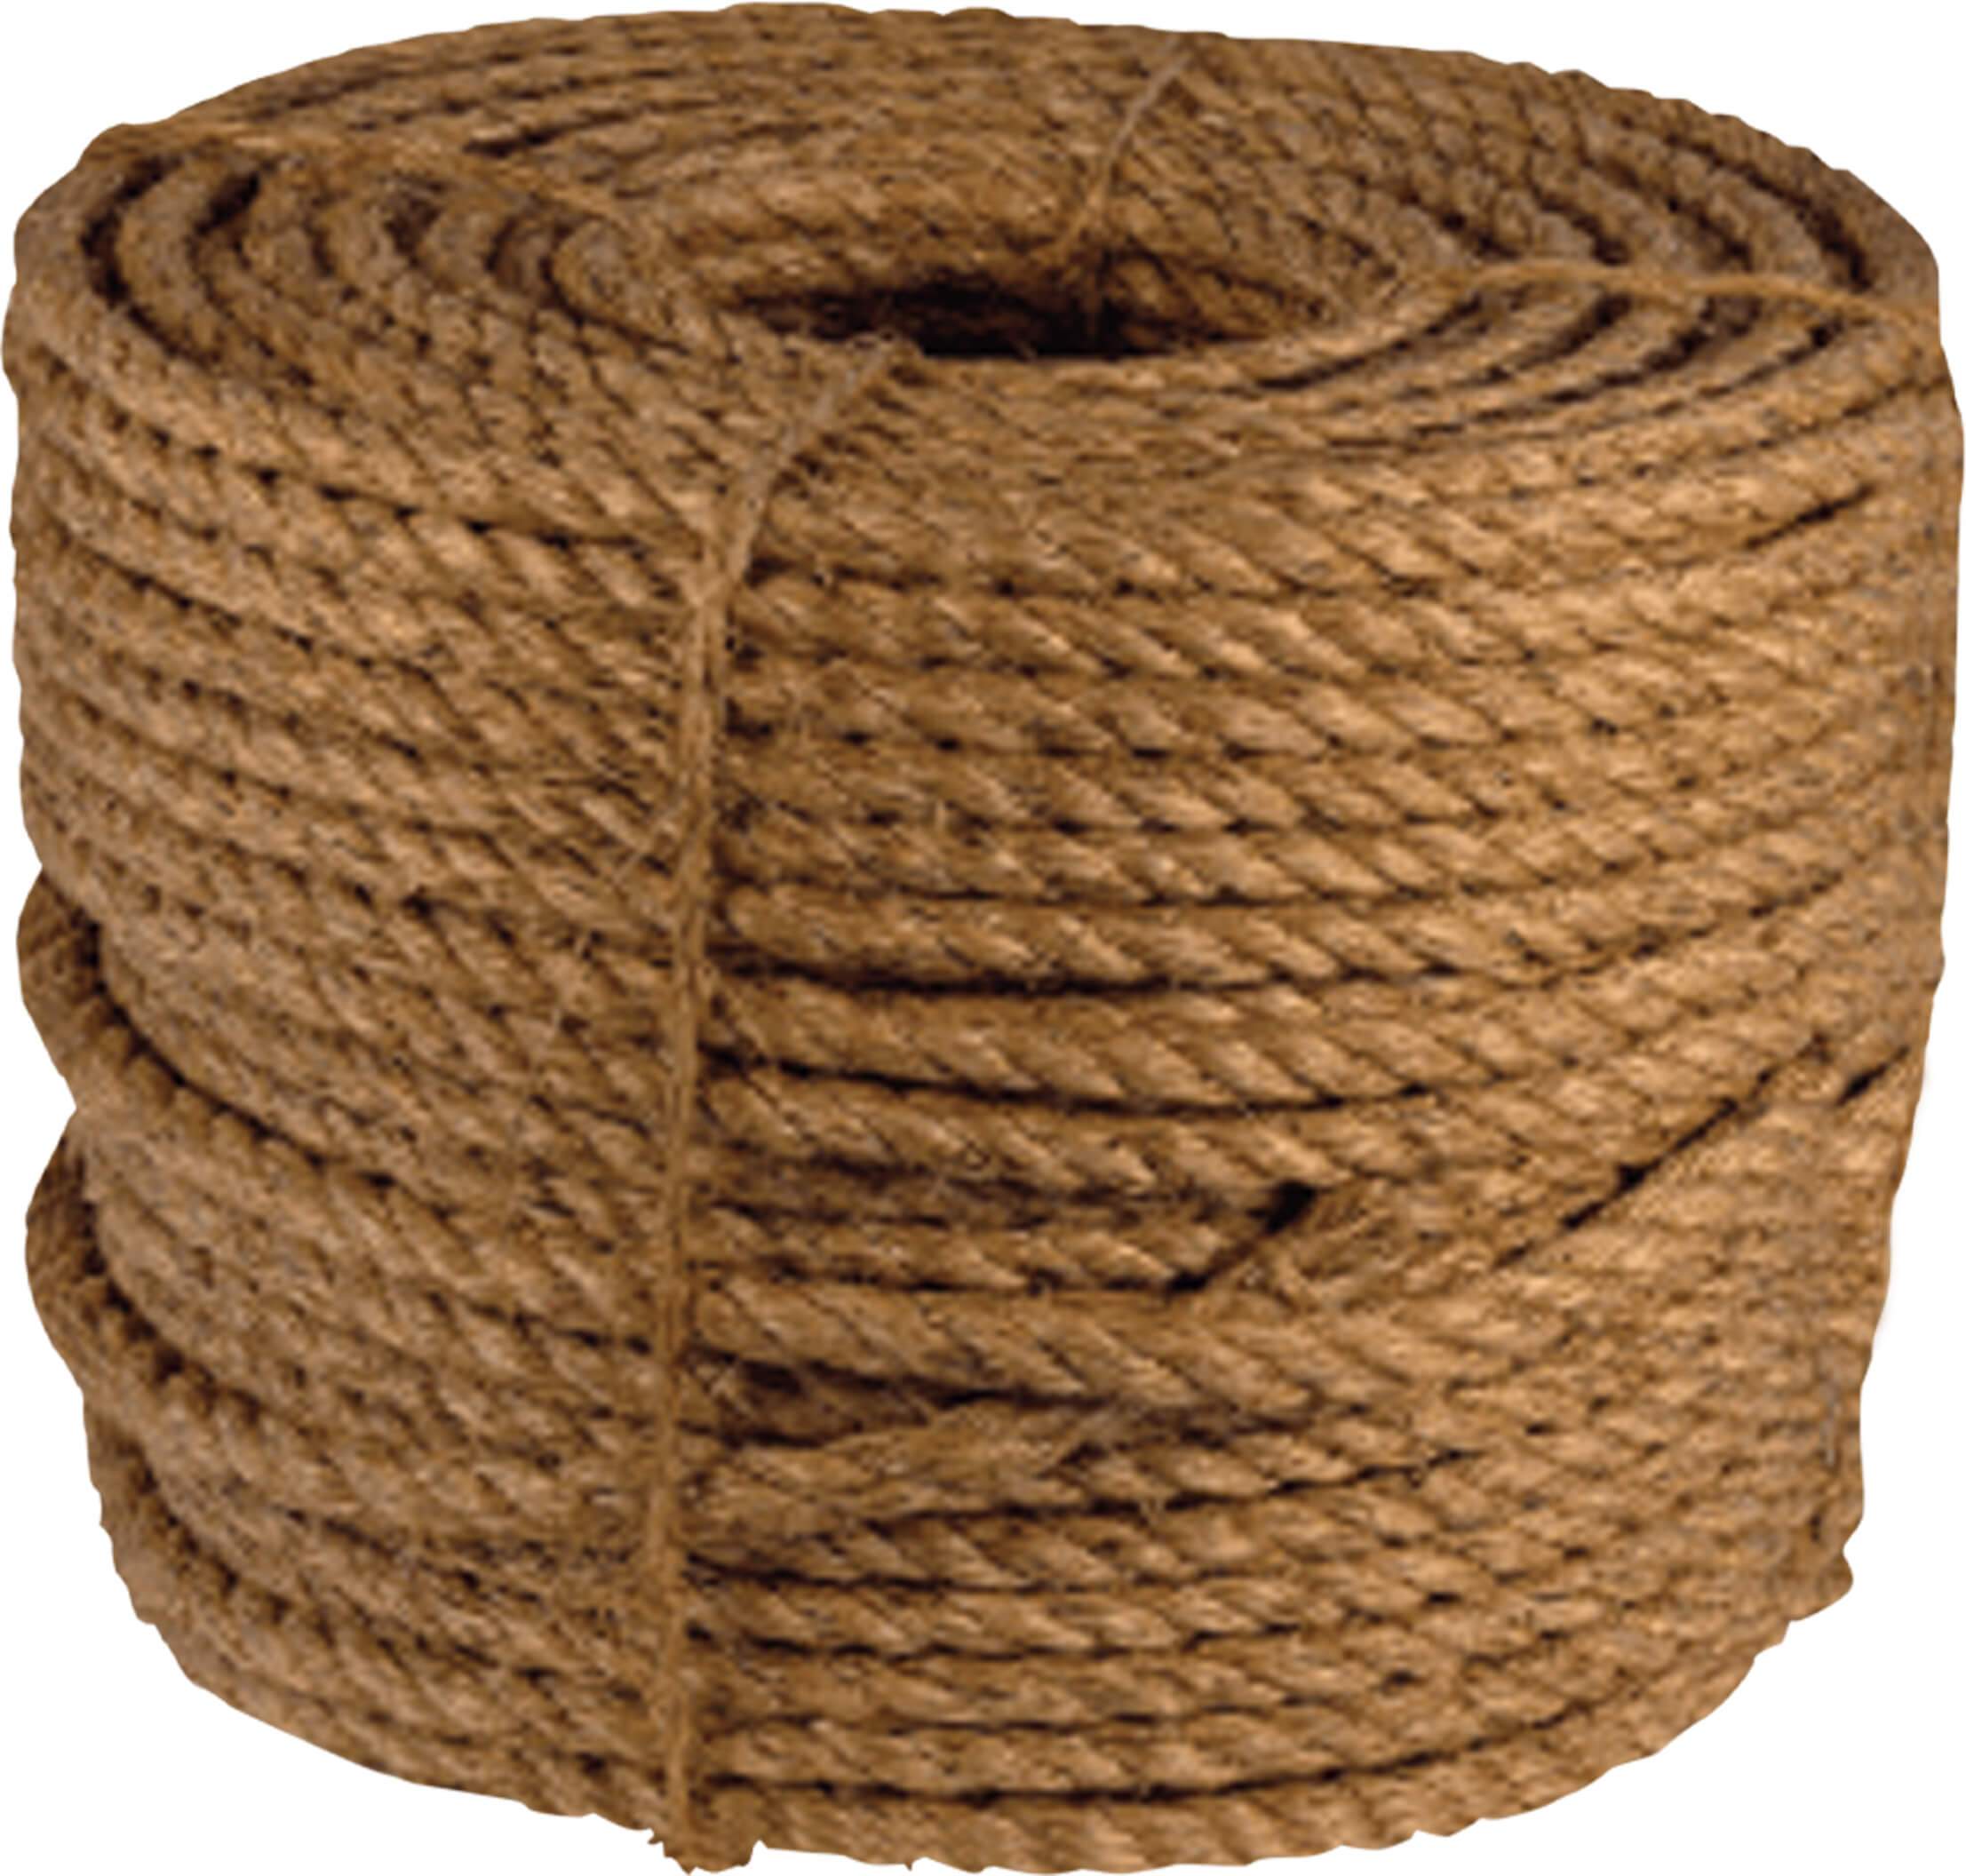 Coconut Rope - Made of Authentic Coconut Fibers from Indonesia